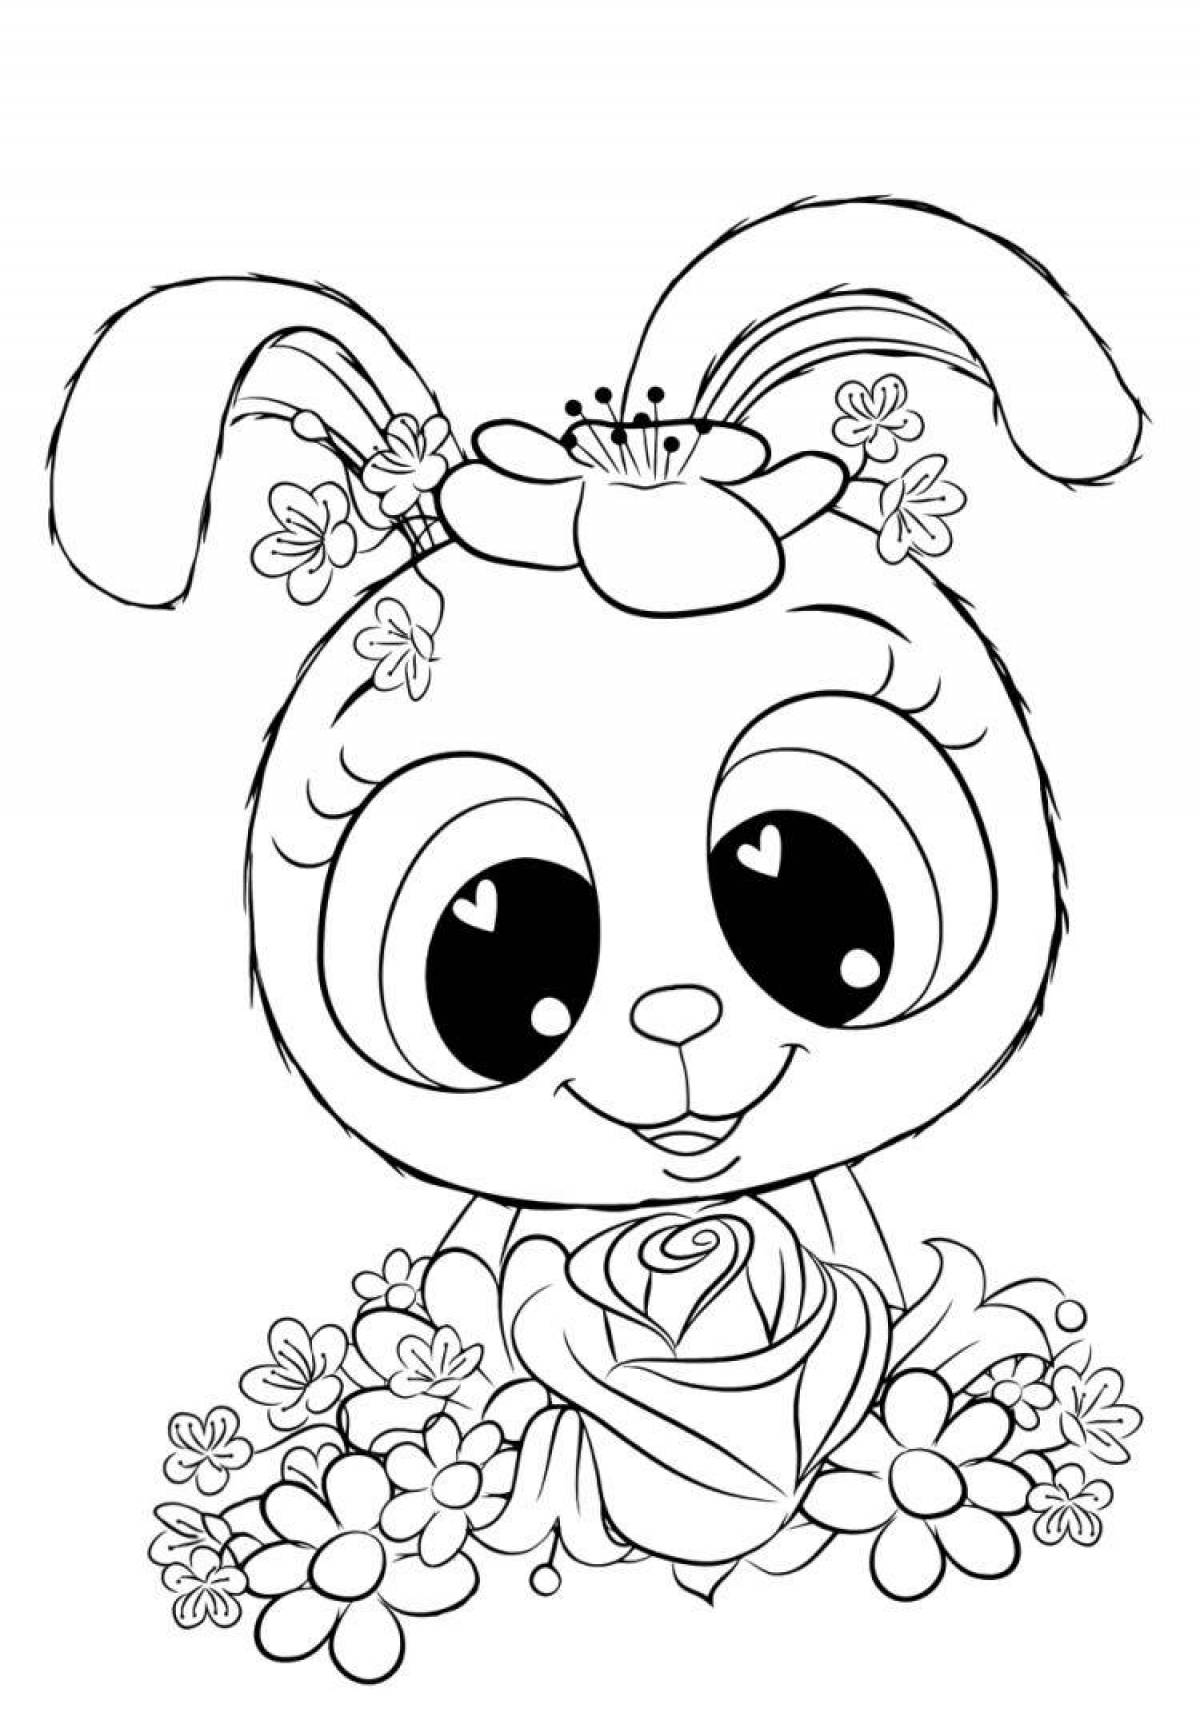 Happy coloring book for bunny girls